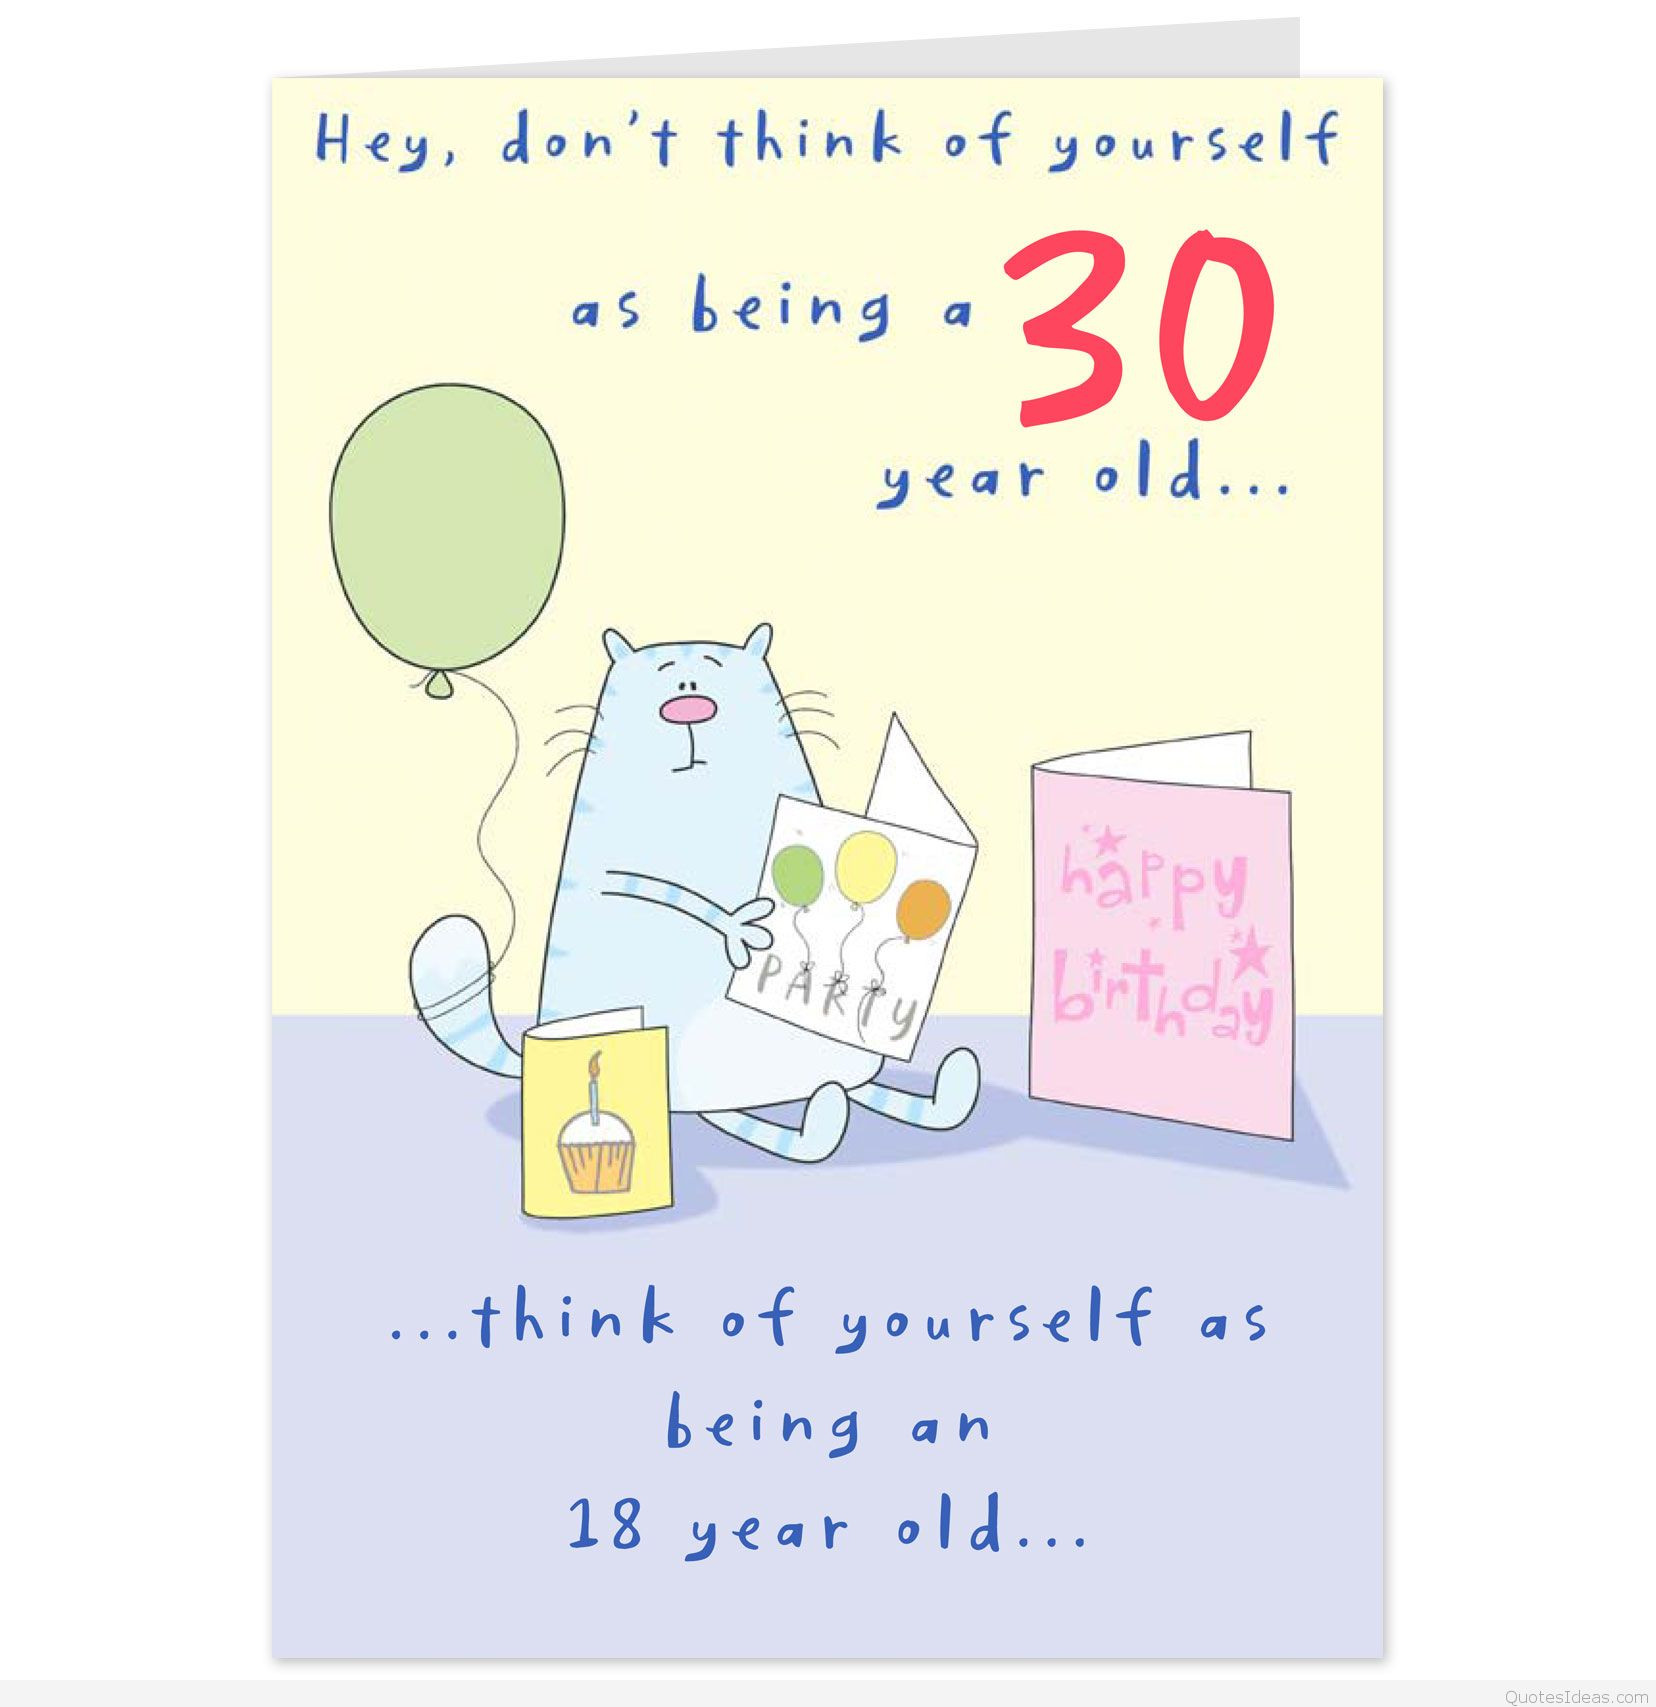 Funny Sayings For Birthday Cards
 Latest funny cards quotes and sayings